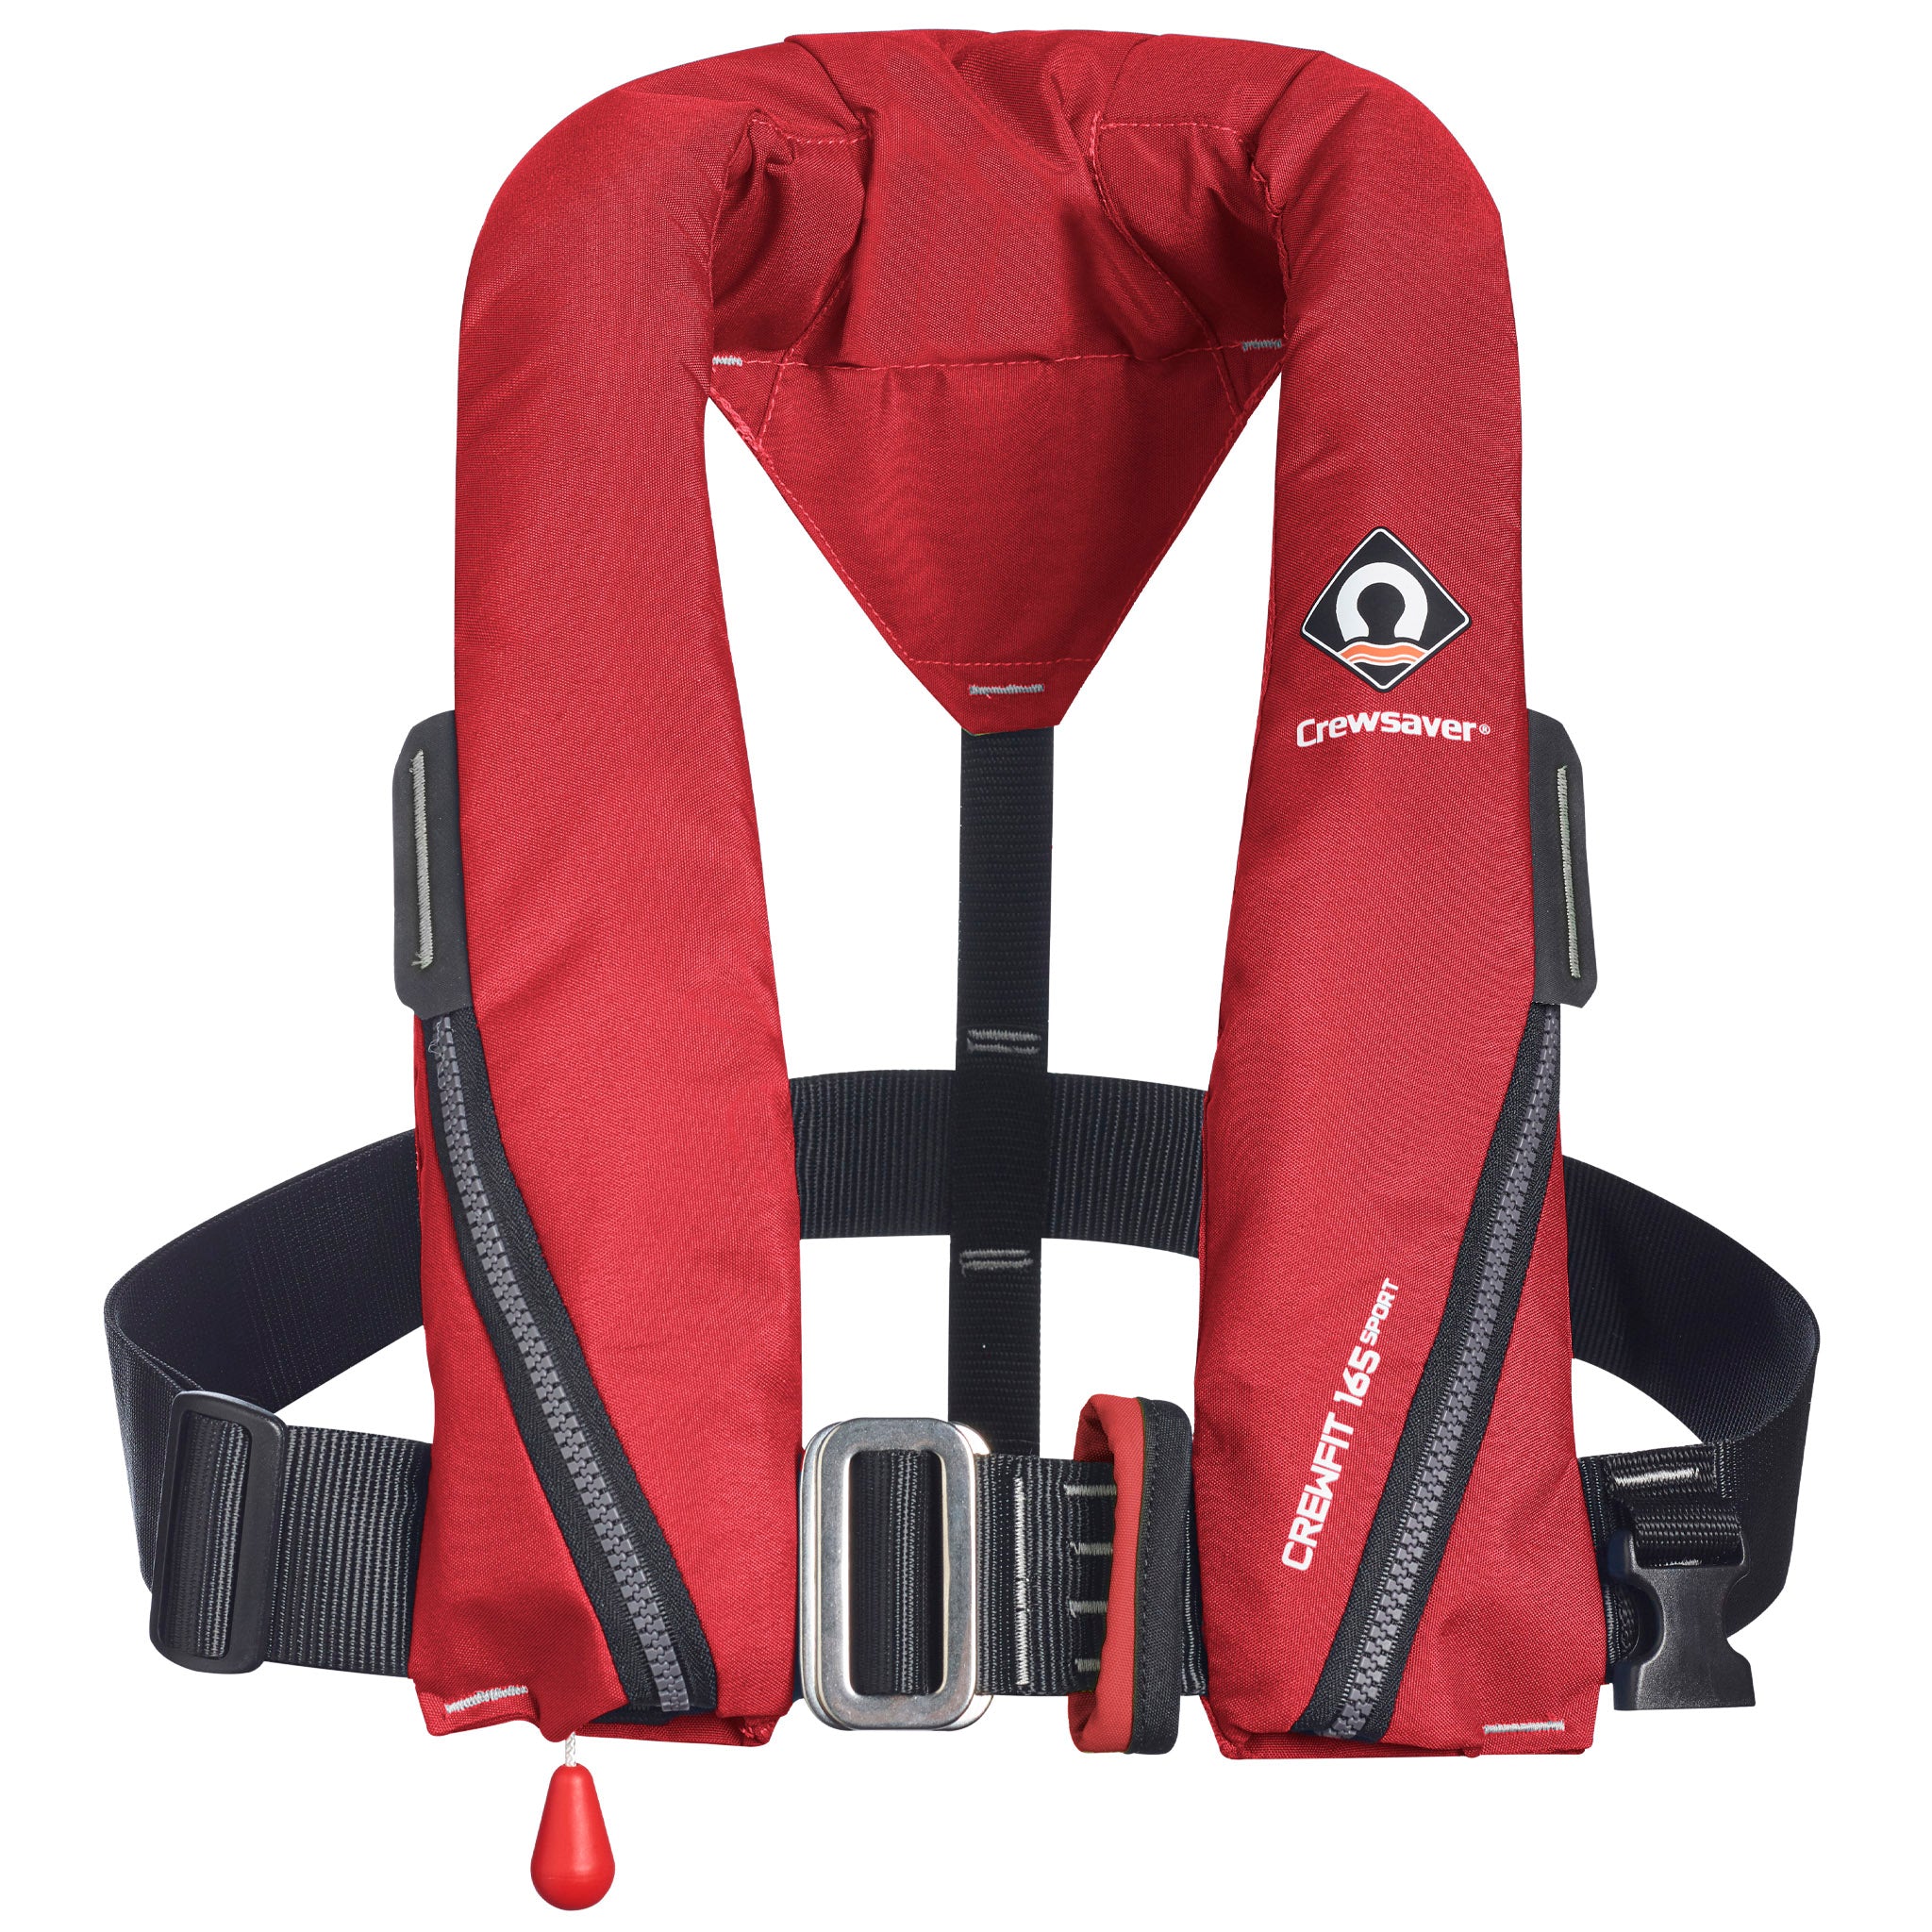 Crewsaver Crewfit 165N Sport Lifejacket Auto Inflation inc Harness - Red